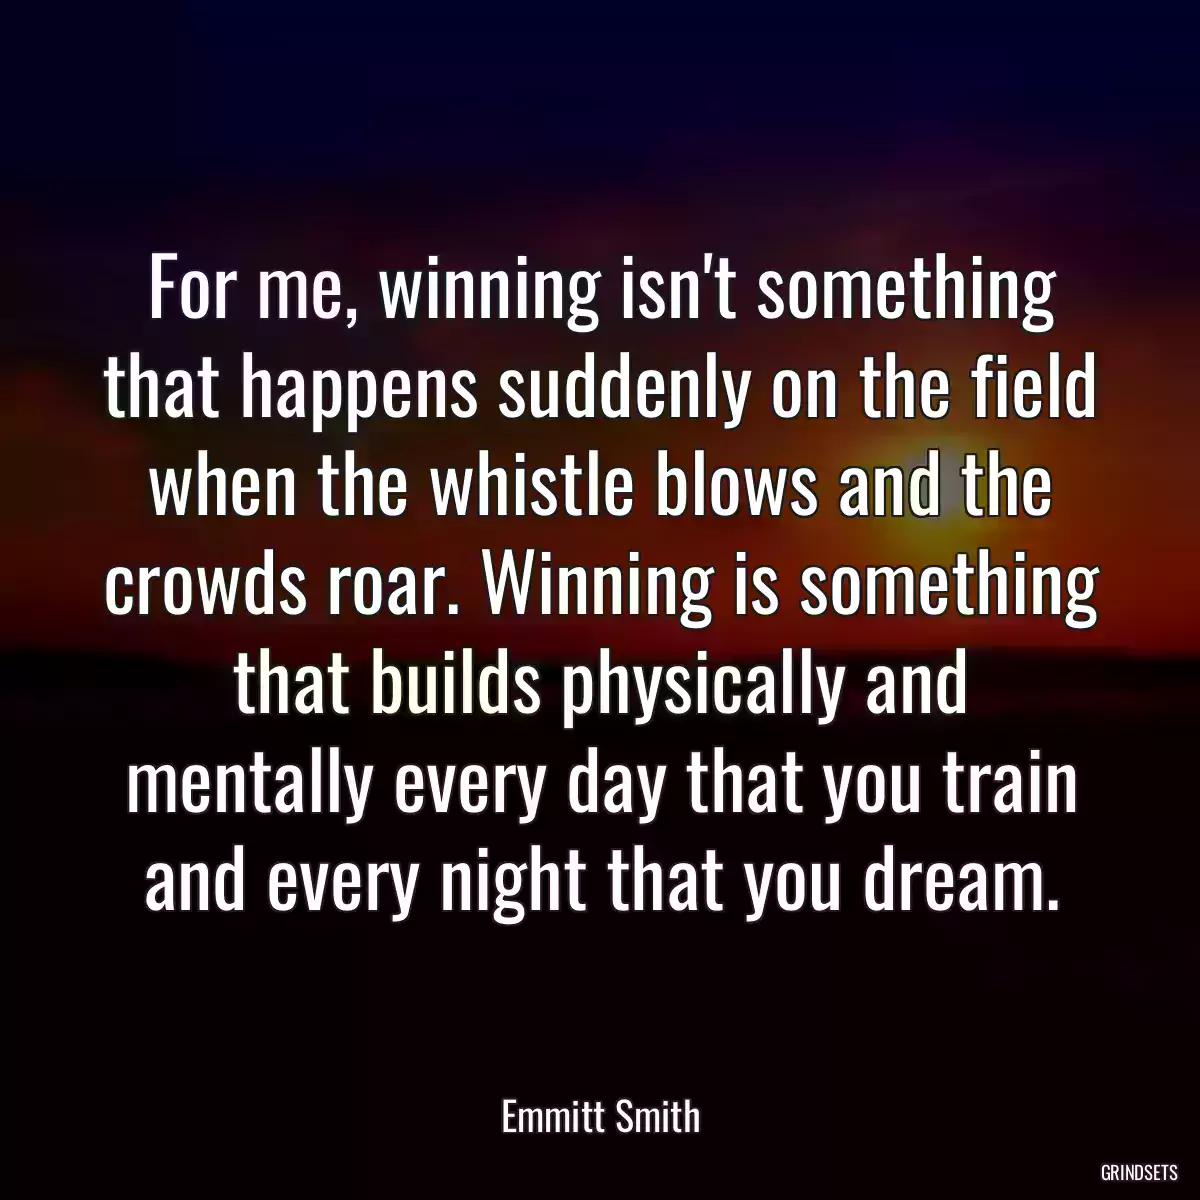 For me, winning isn\'t something that happens suddenly on the field when the whistle blows and the crowds roar. Winning is something that builds physically and mentally every day that you train and every night that you dream.